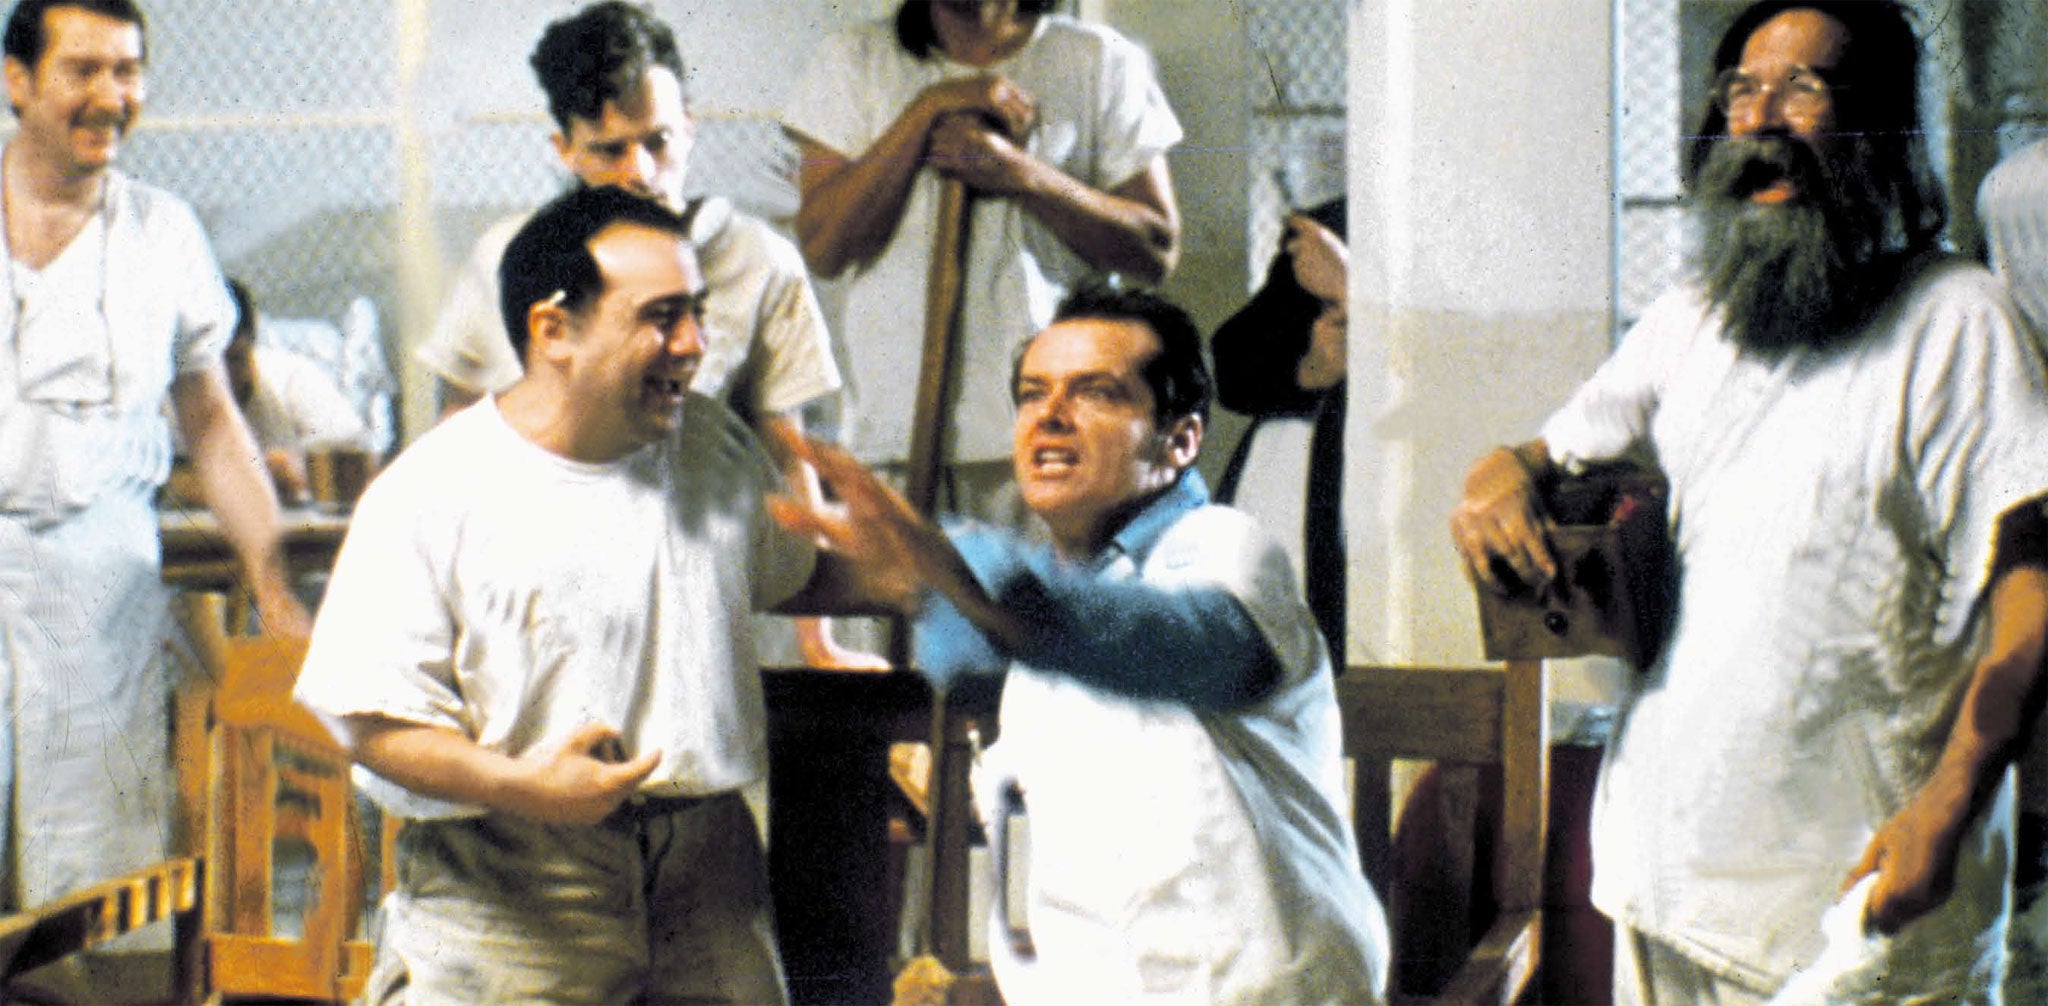 Jack Nicholson in One Flew Over the Cuckoo’s Nest. The film reflected worries about brutal psychiatric institutions